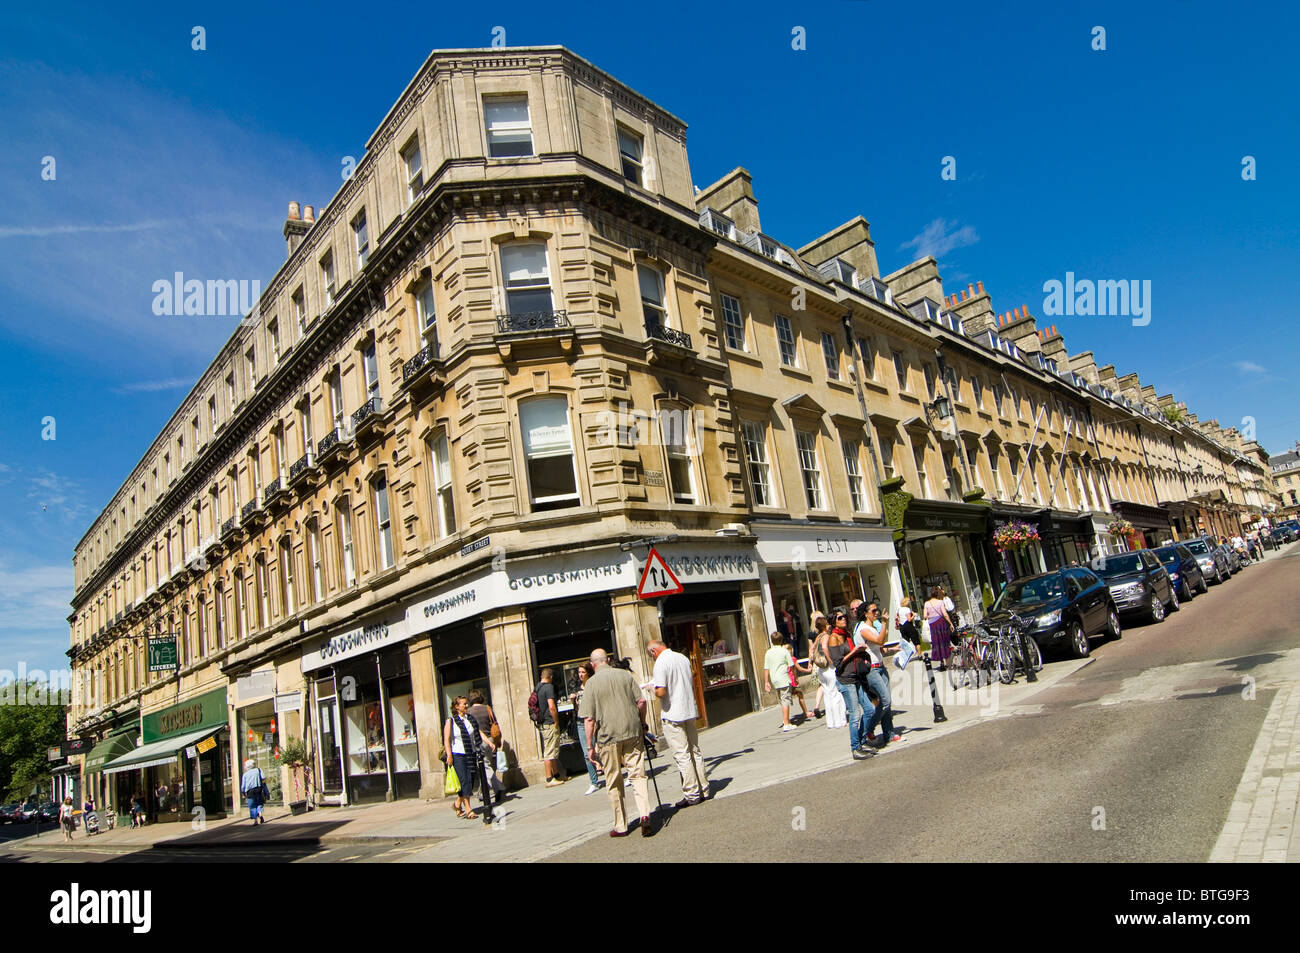 Horizontal wide angle view of classic Bathstone architecture in Bath city centre on a bright summer day. Stock Photo